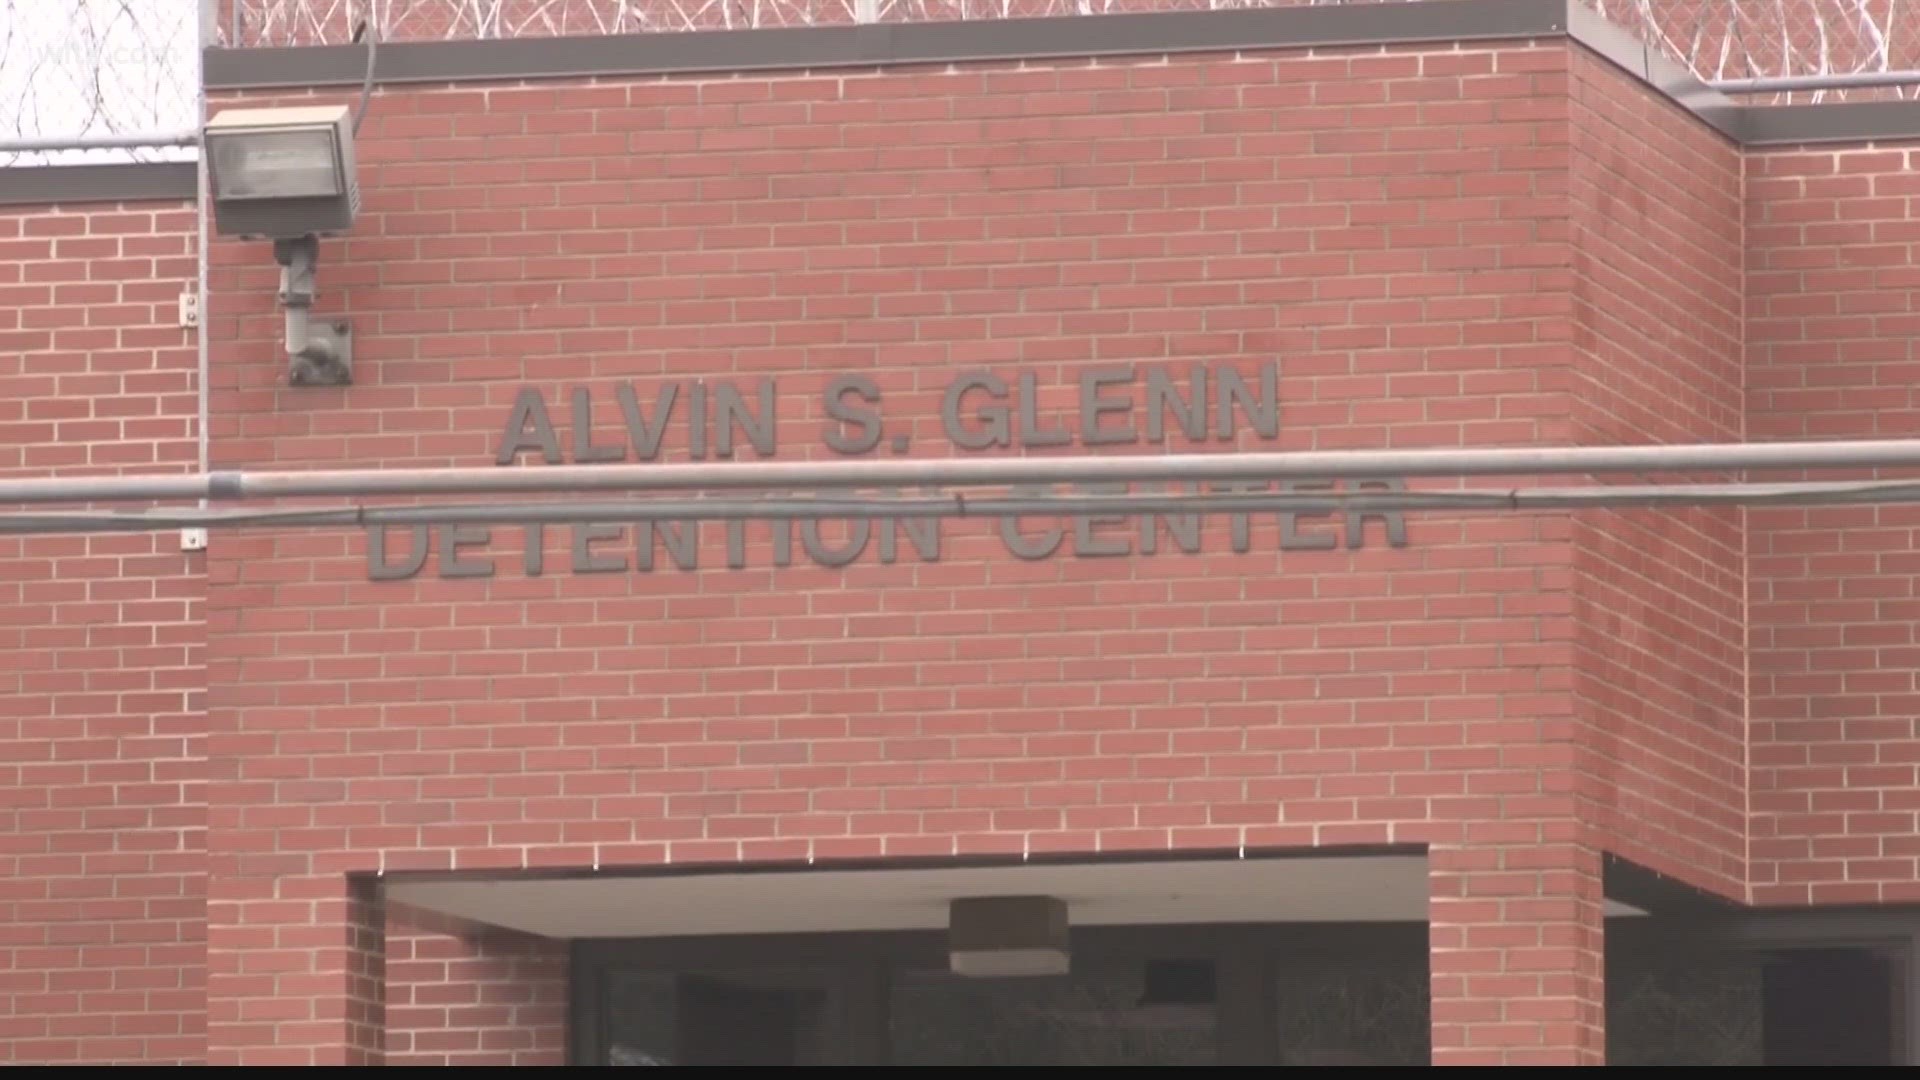 A committee focused on making improvements at the beleaguered Alvin S. Glenn Detention Center met this afternoon to give updates on what they're doing.